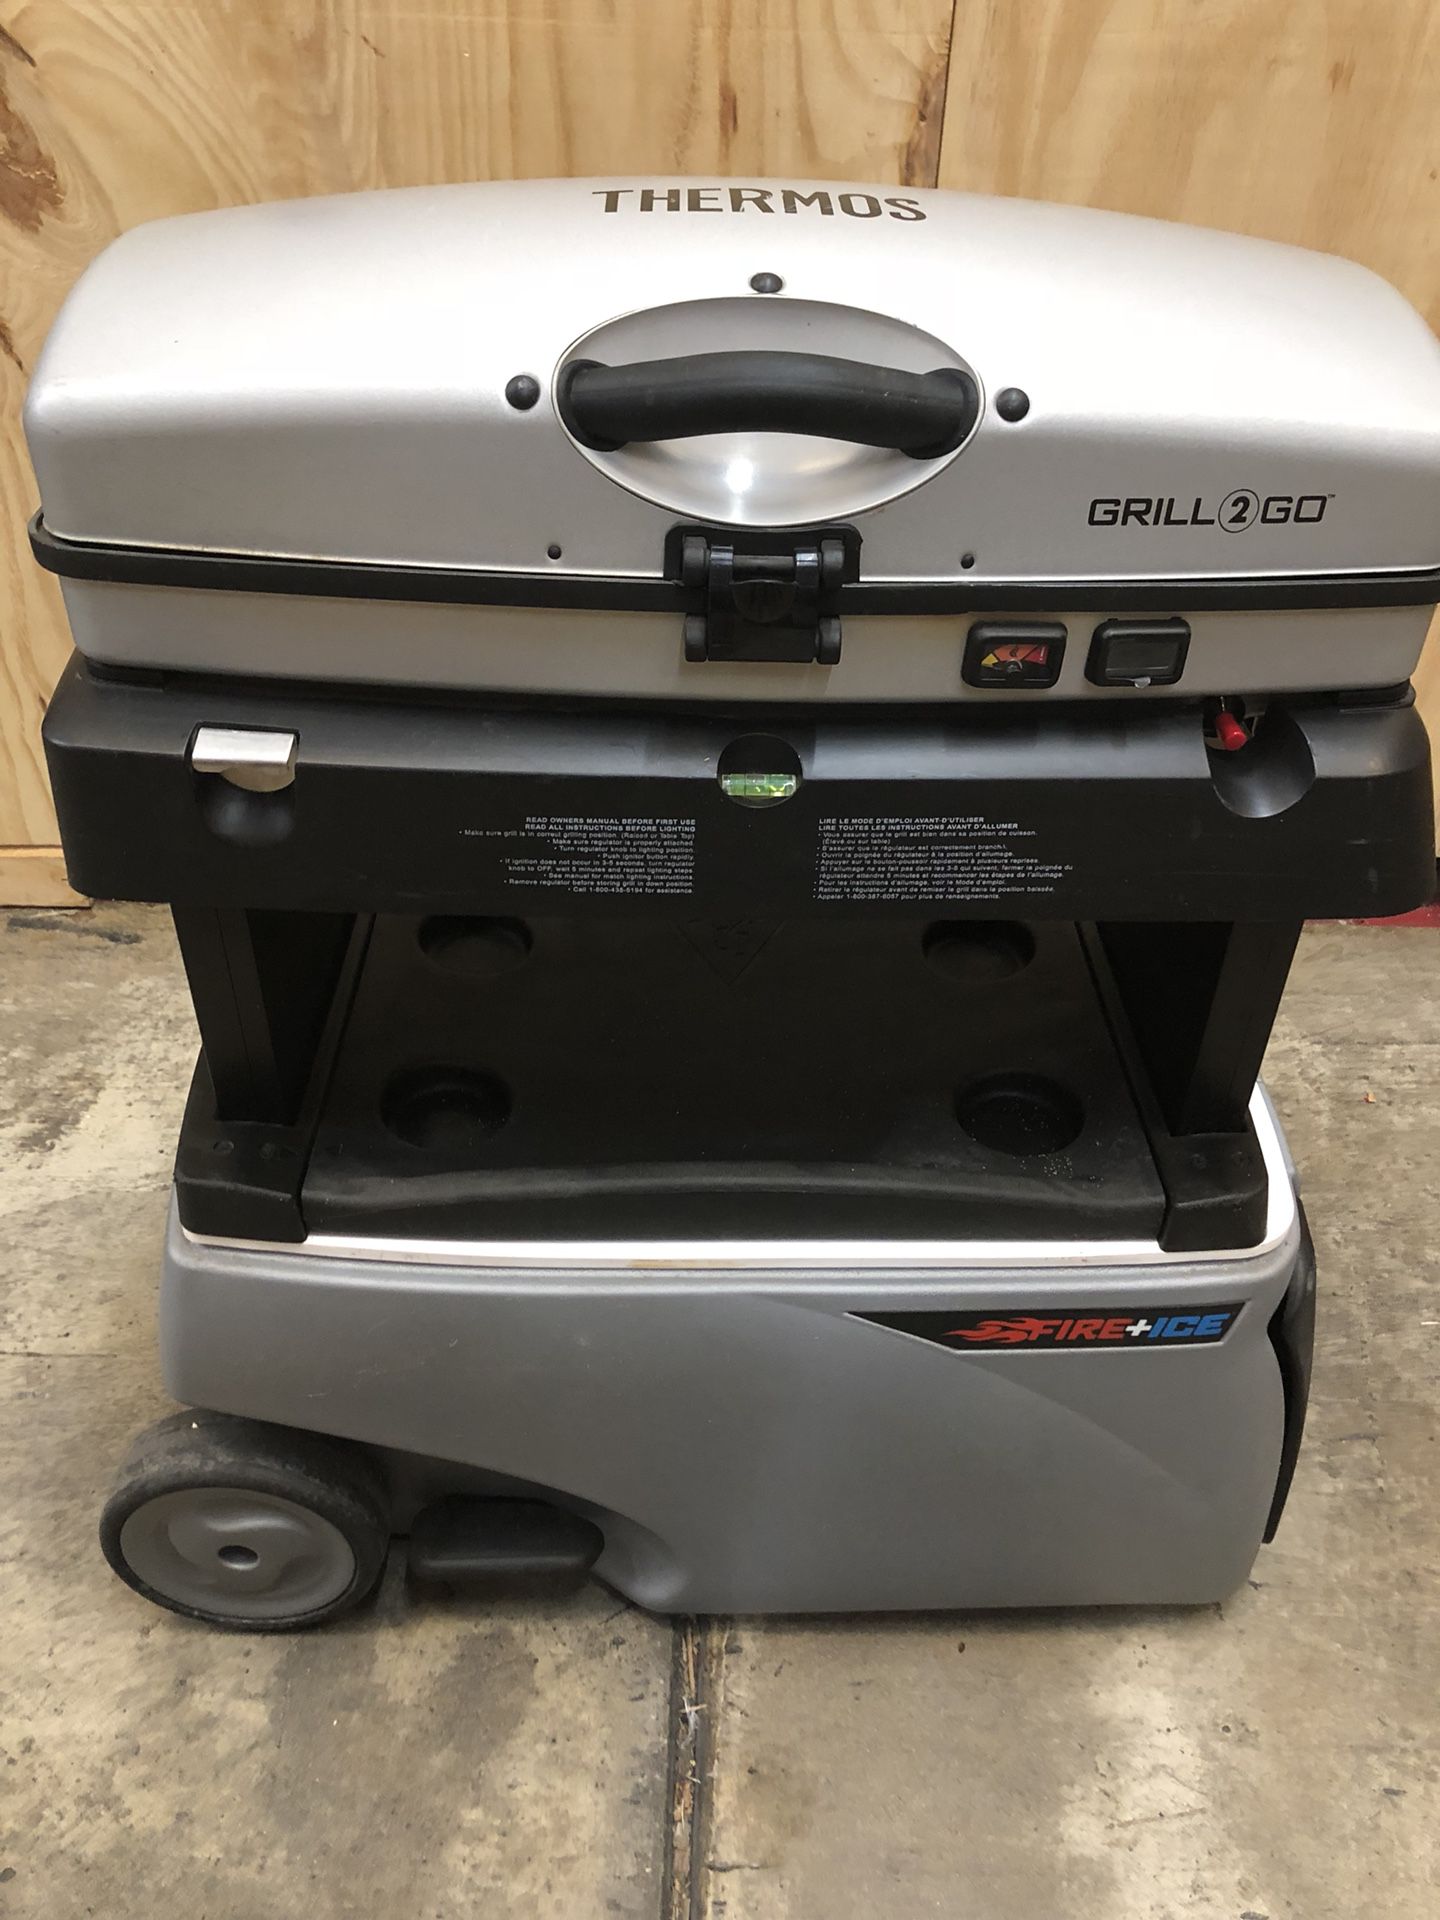 Thermos Grill 2 Go Fire And Ice - Grill/Cooler Combo for Sale in Pensacola, - OfferUp